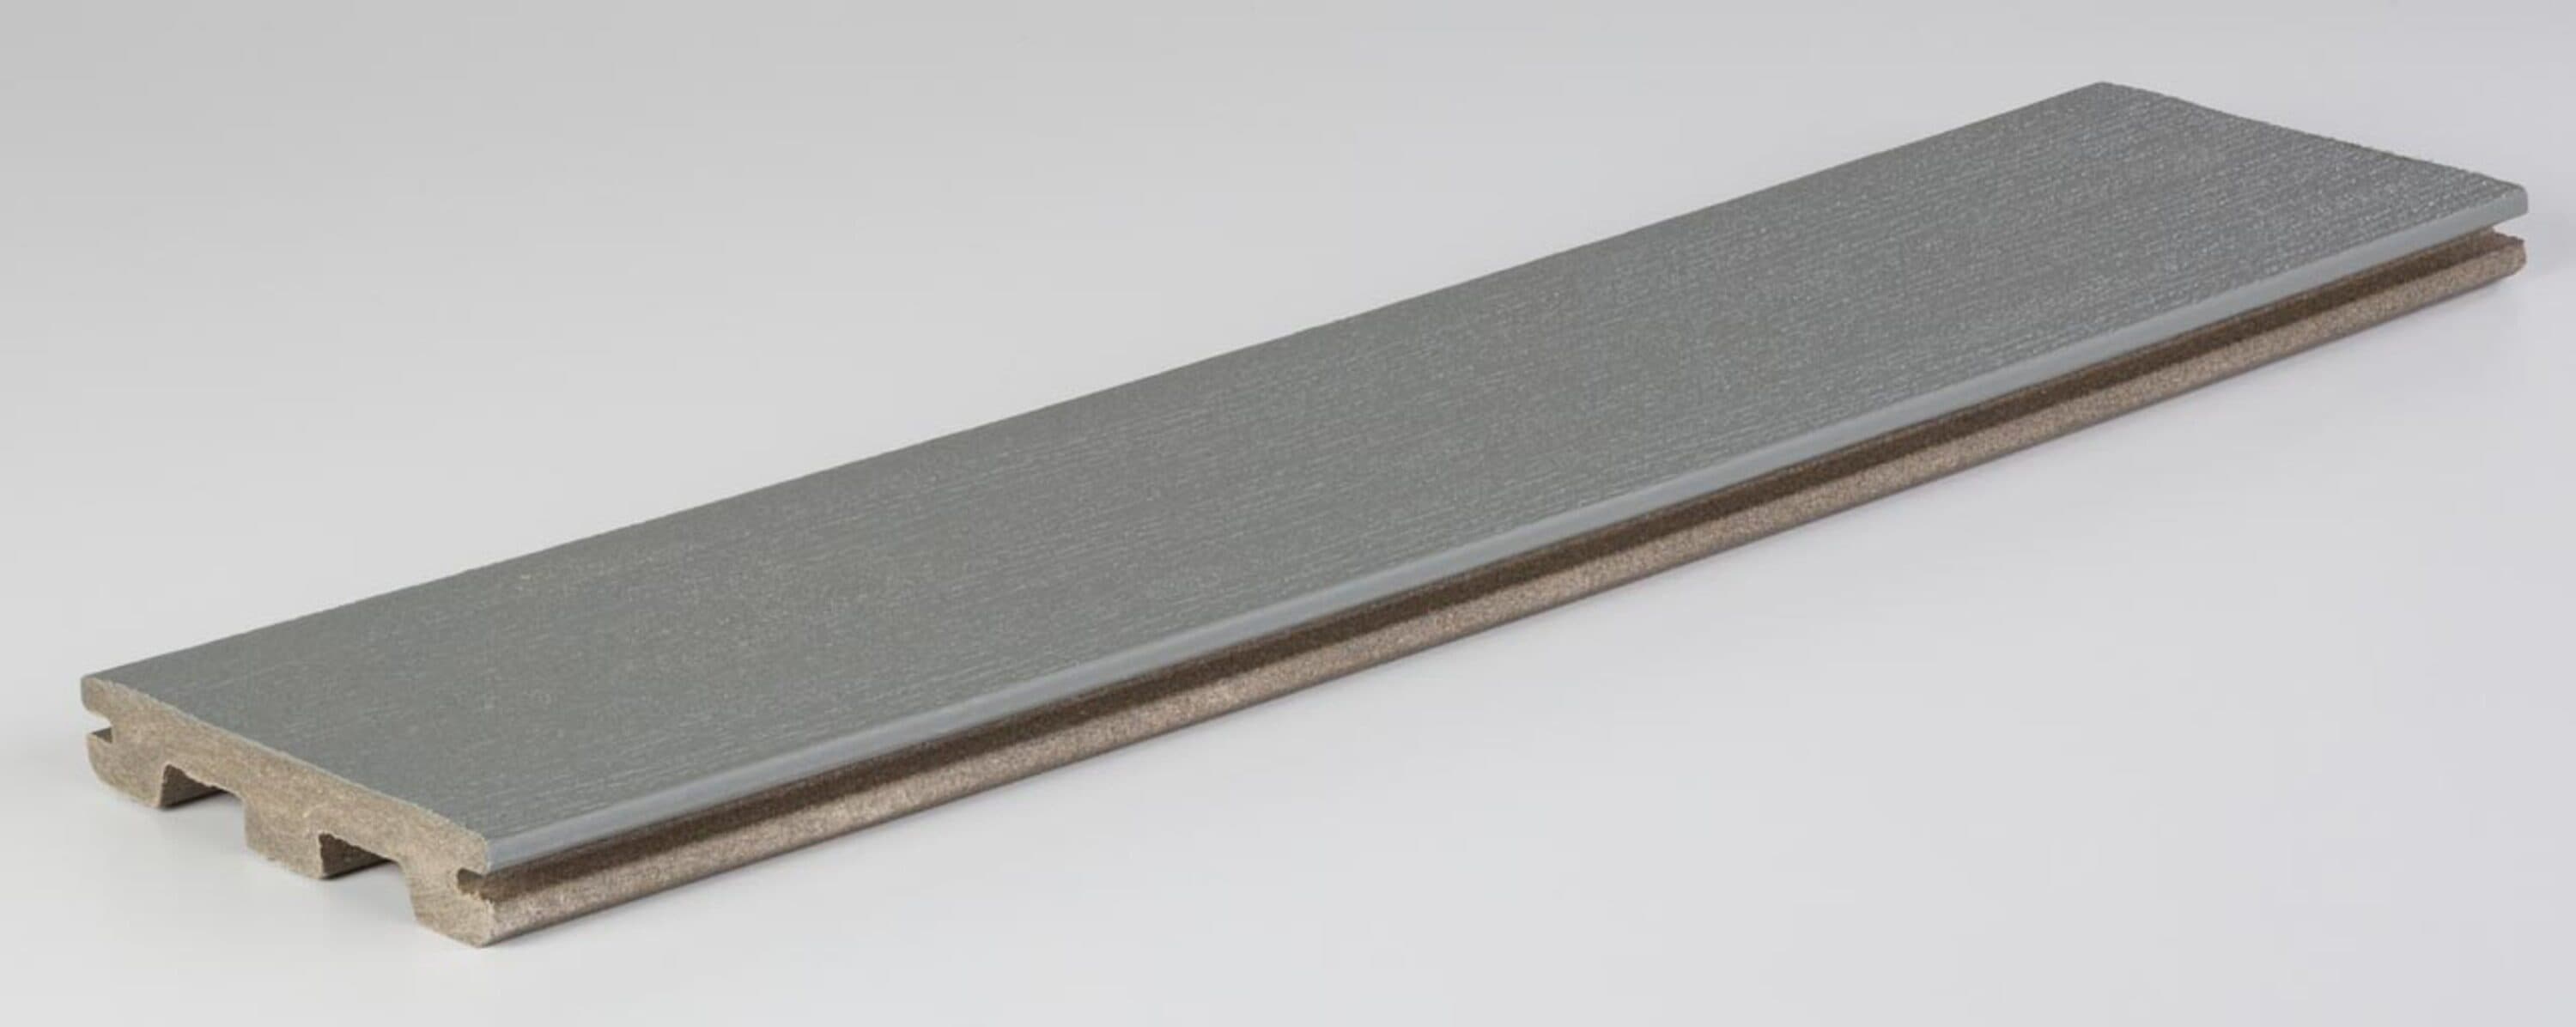 Prime 5/4-in x 6-in x 16-ft Maritime Gray Grooved Composite Deck Board | - TimberTech ESGV5416MG